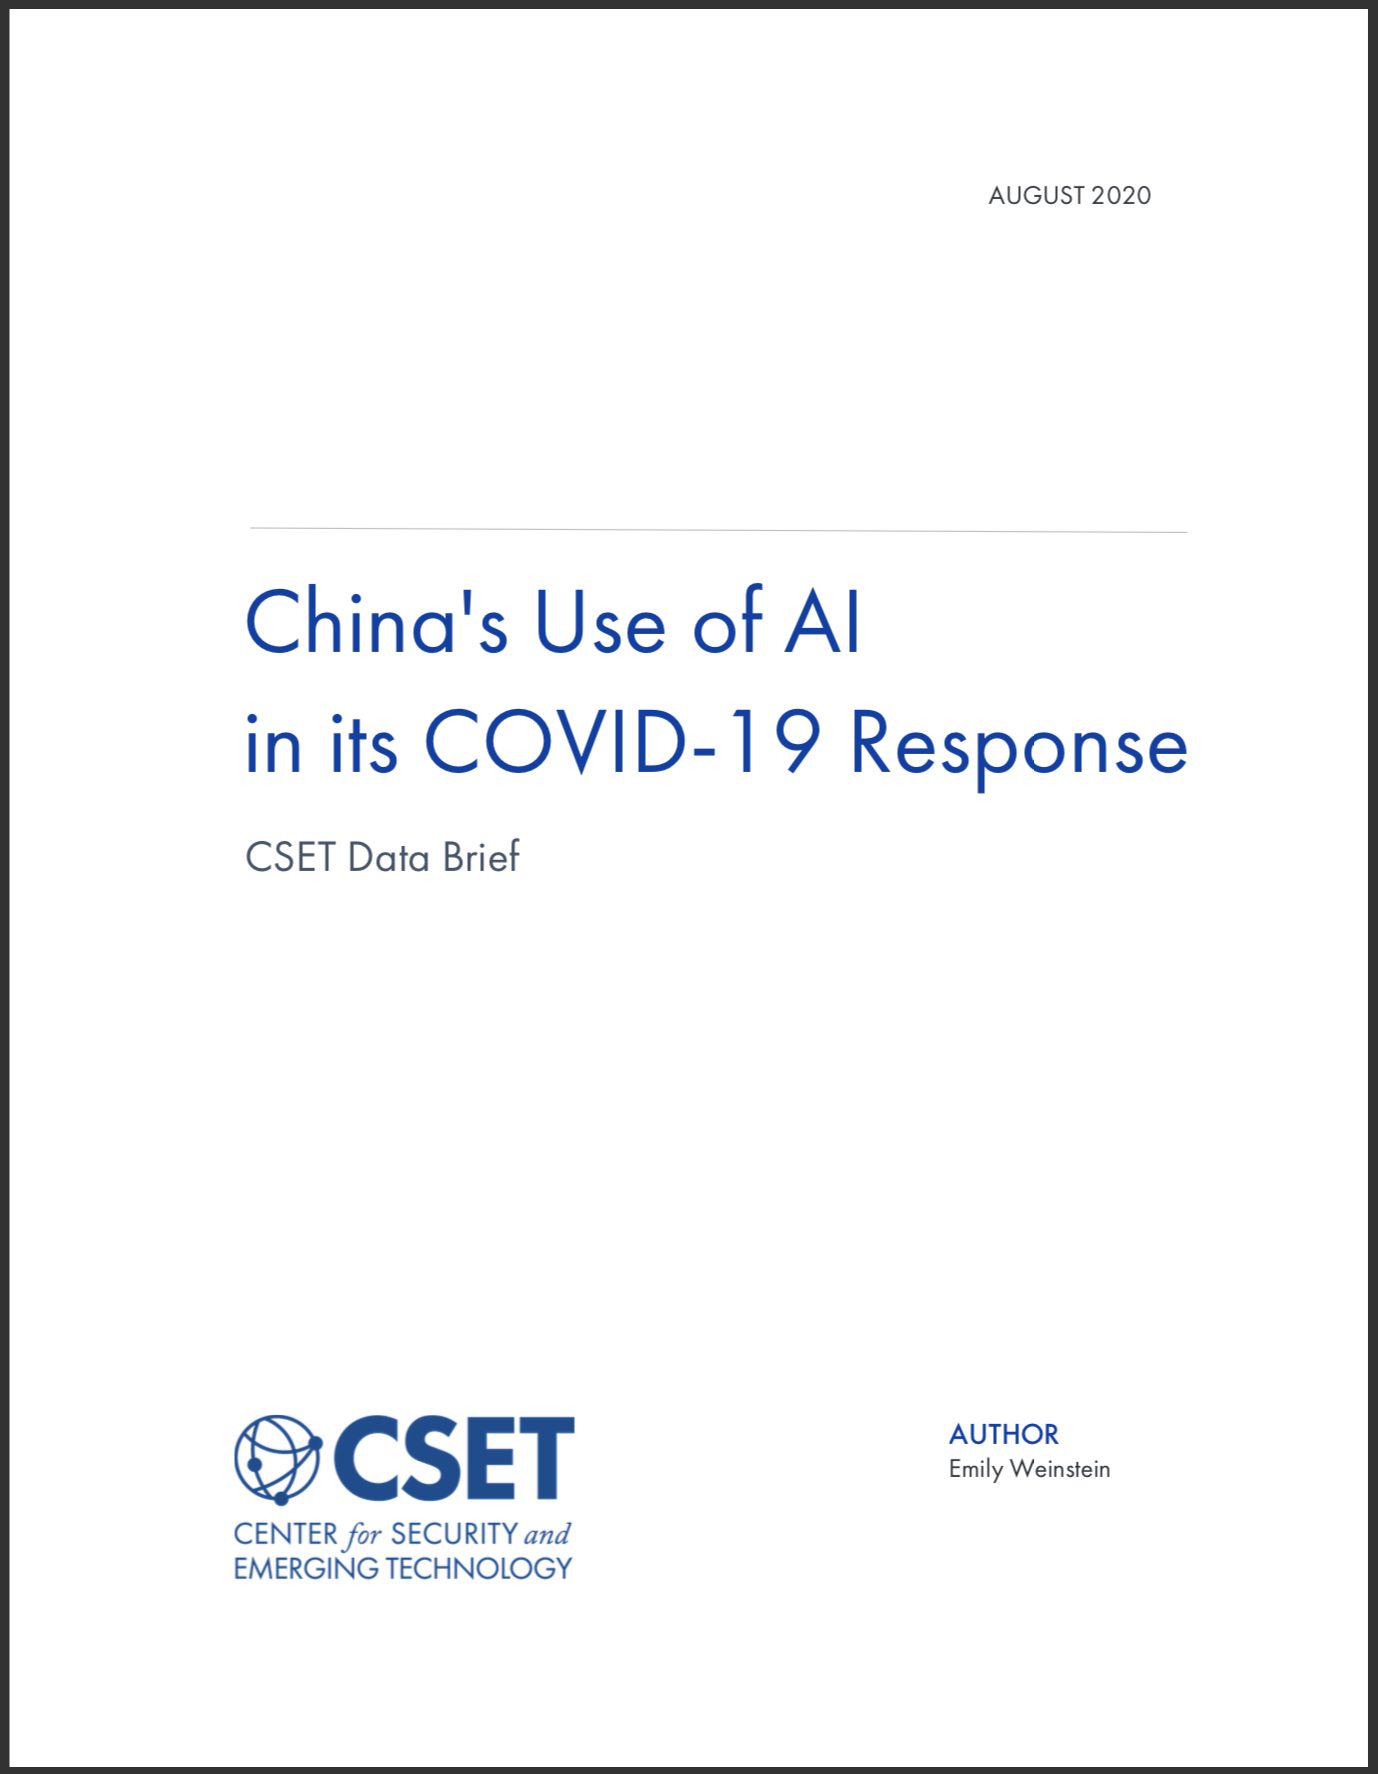 China's Use of AI Report Cover